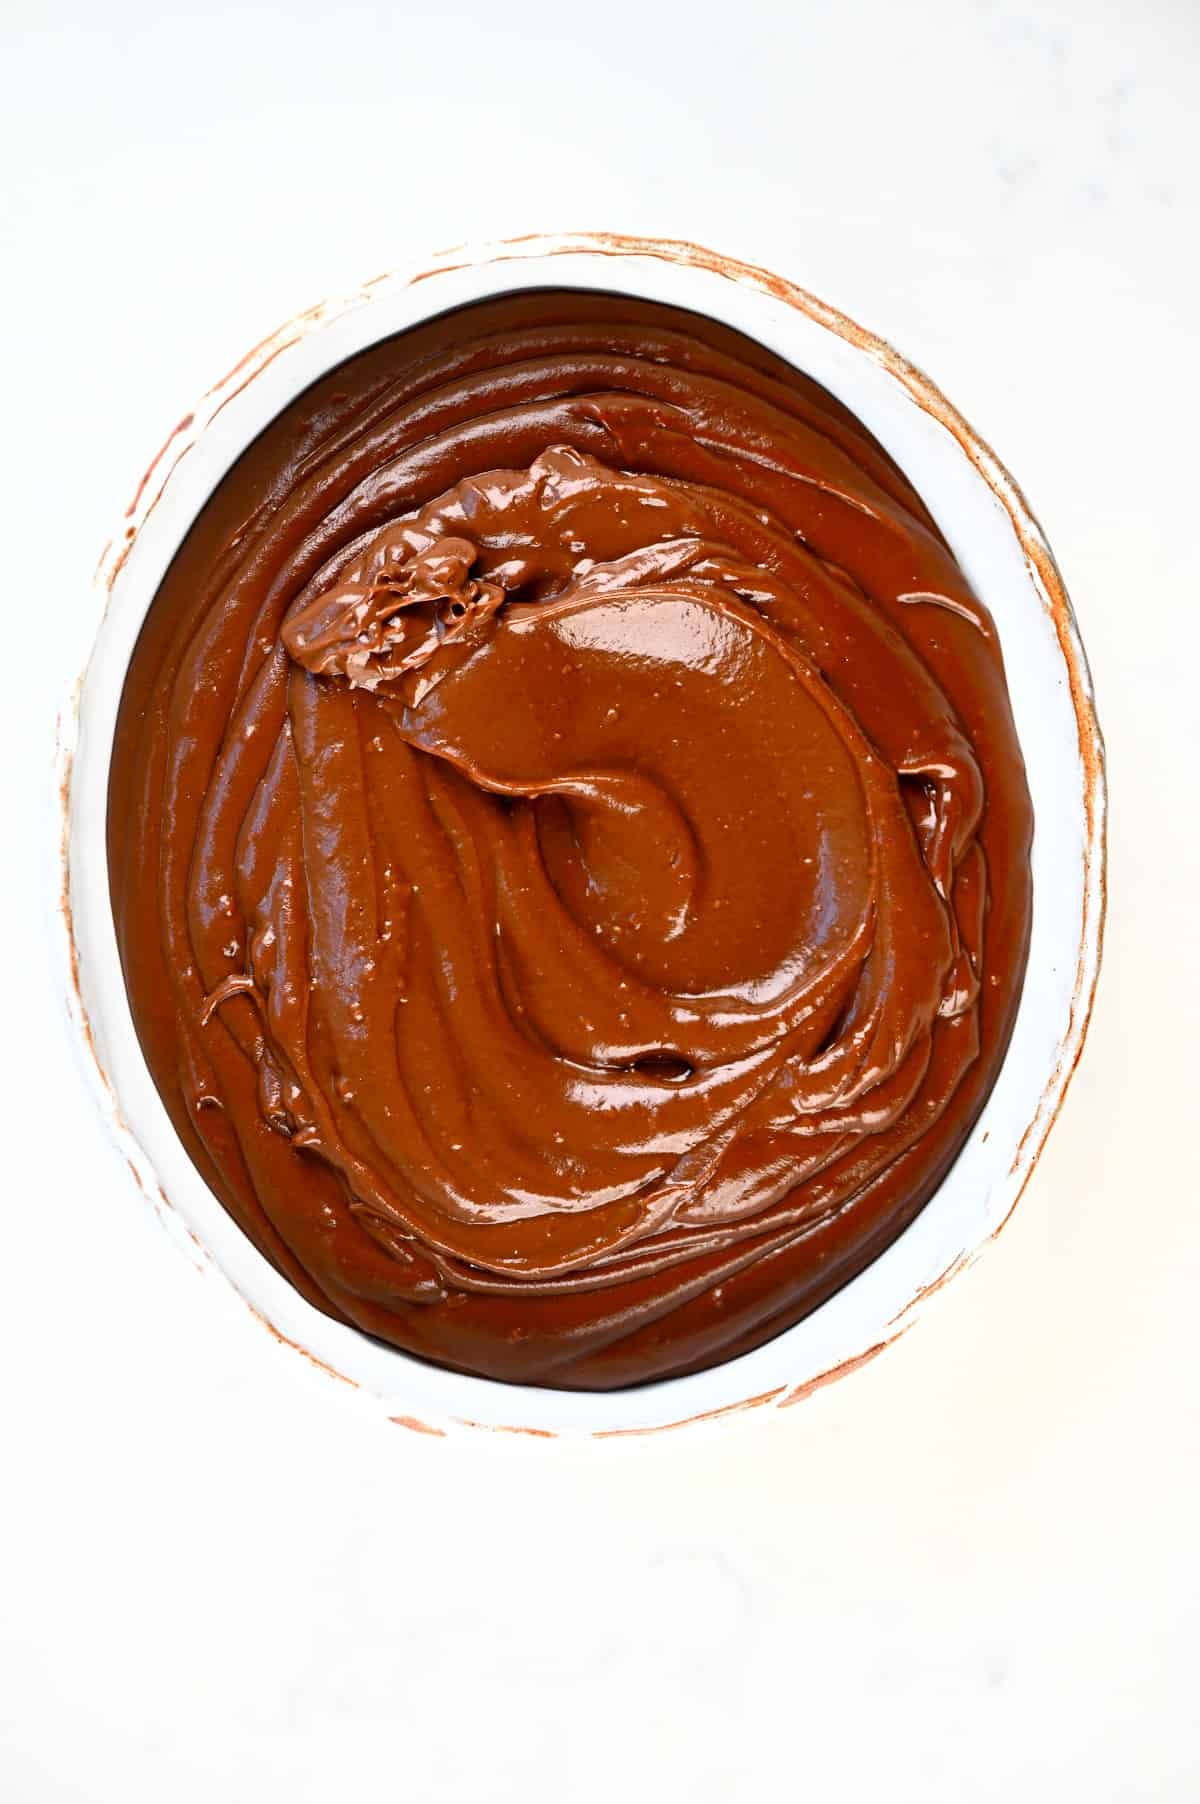 A bowl with Chocolate Pastry Cream